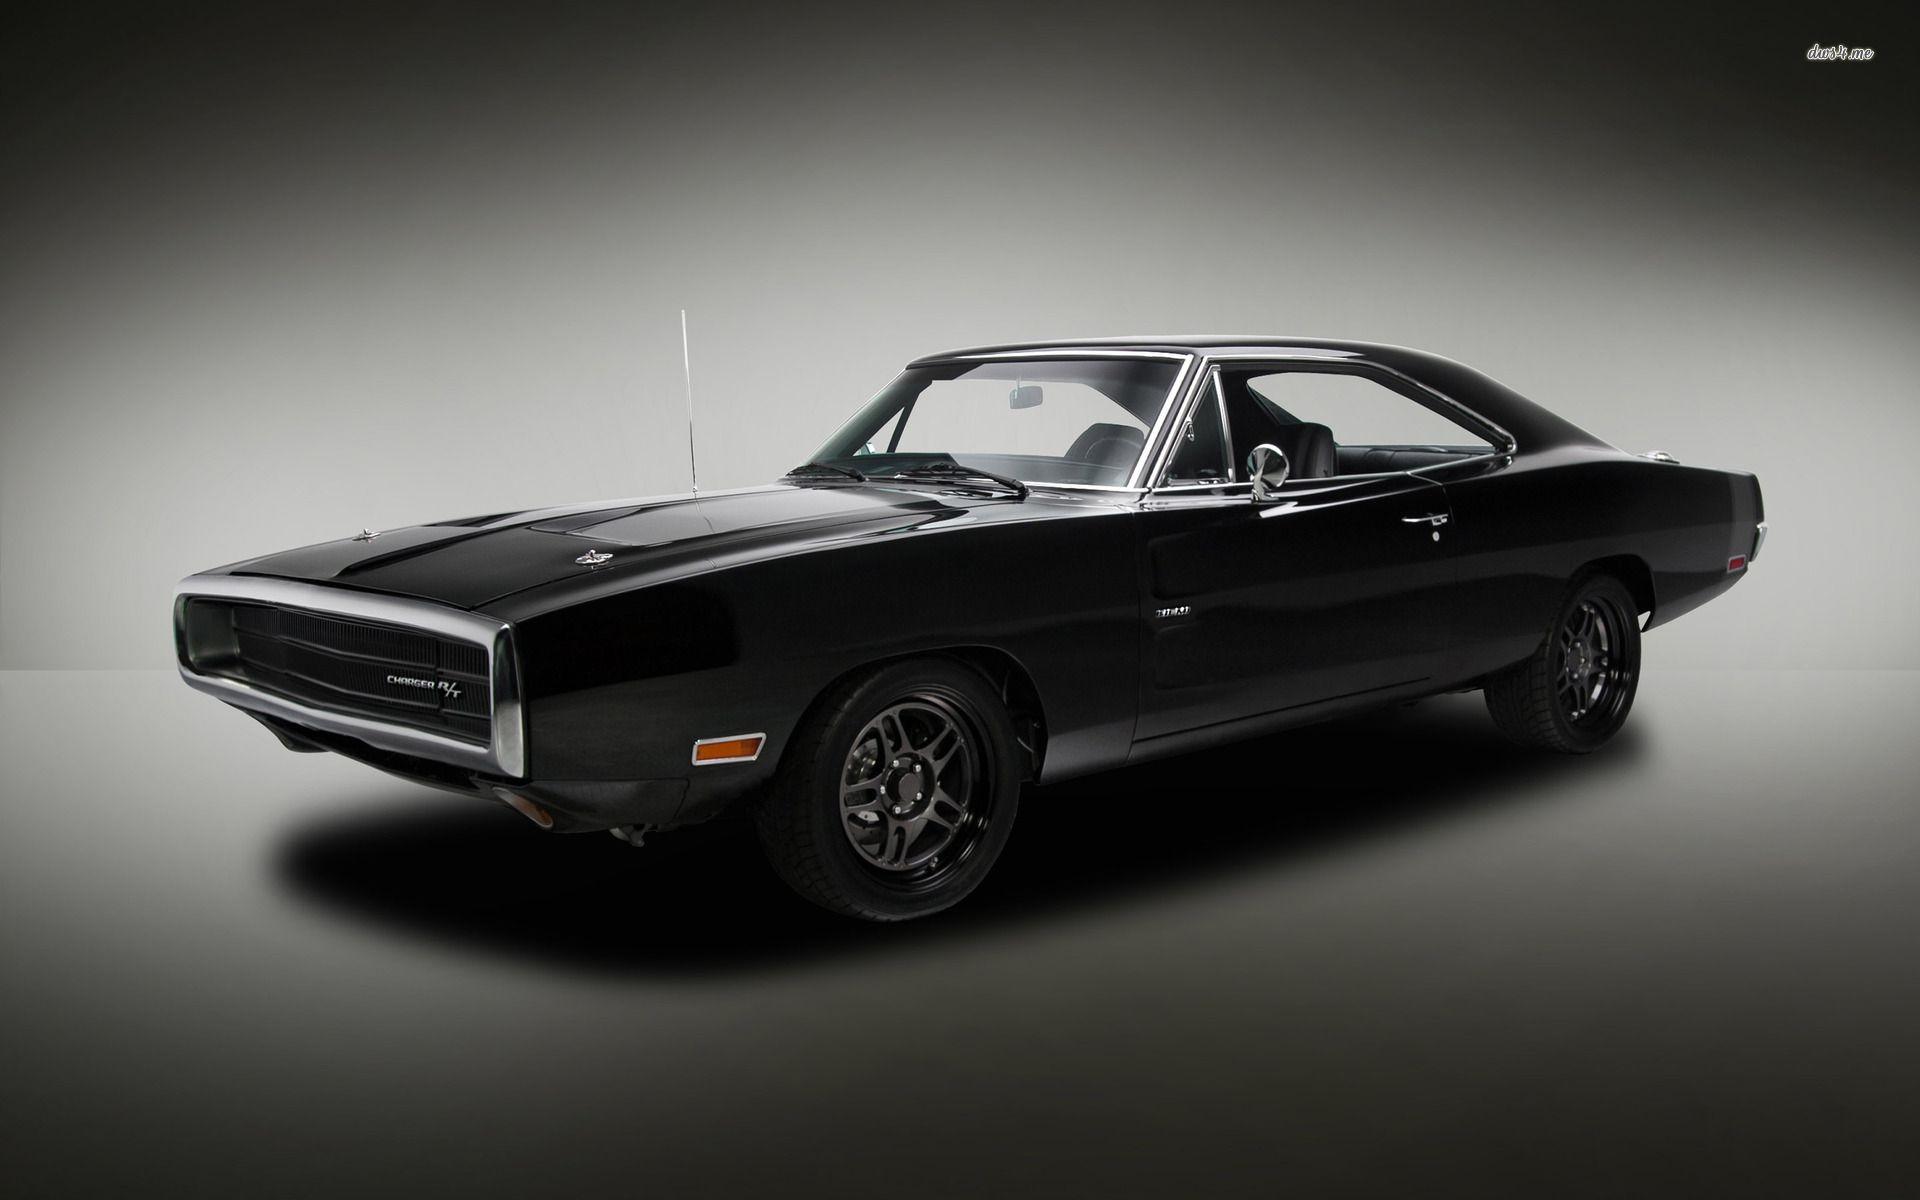 Cool Car Wallpaper. Dodge charger